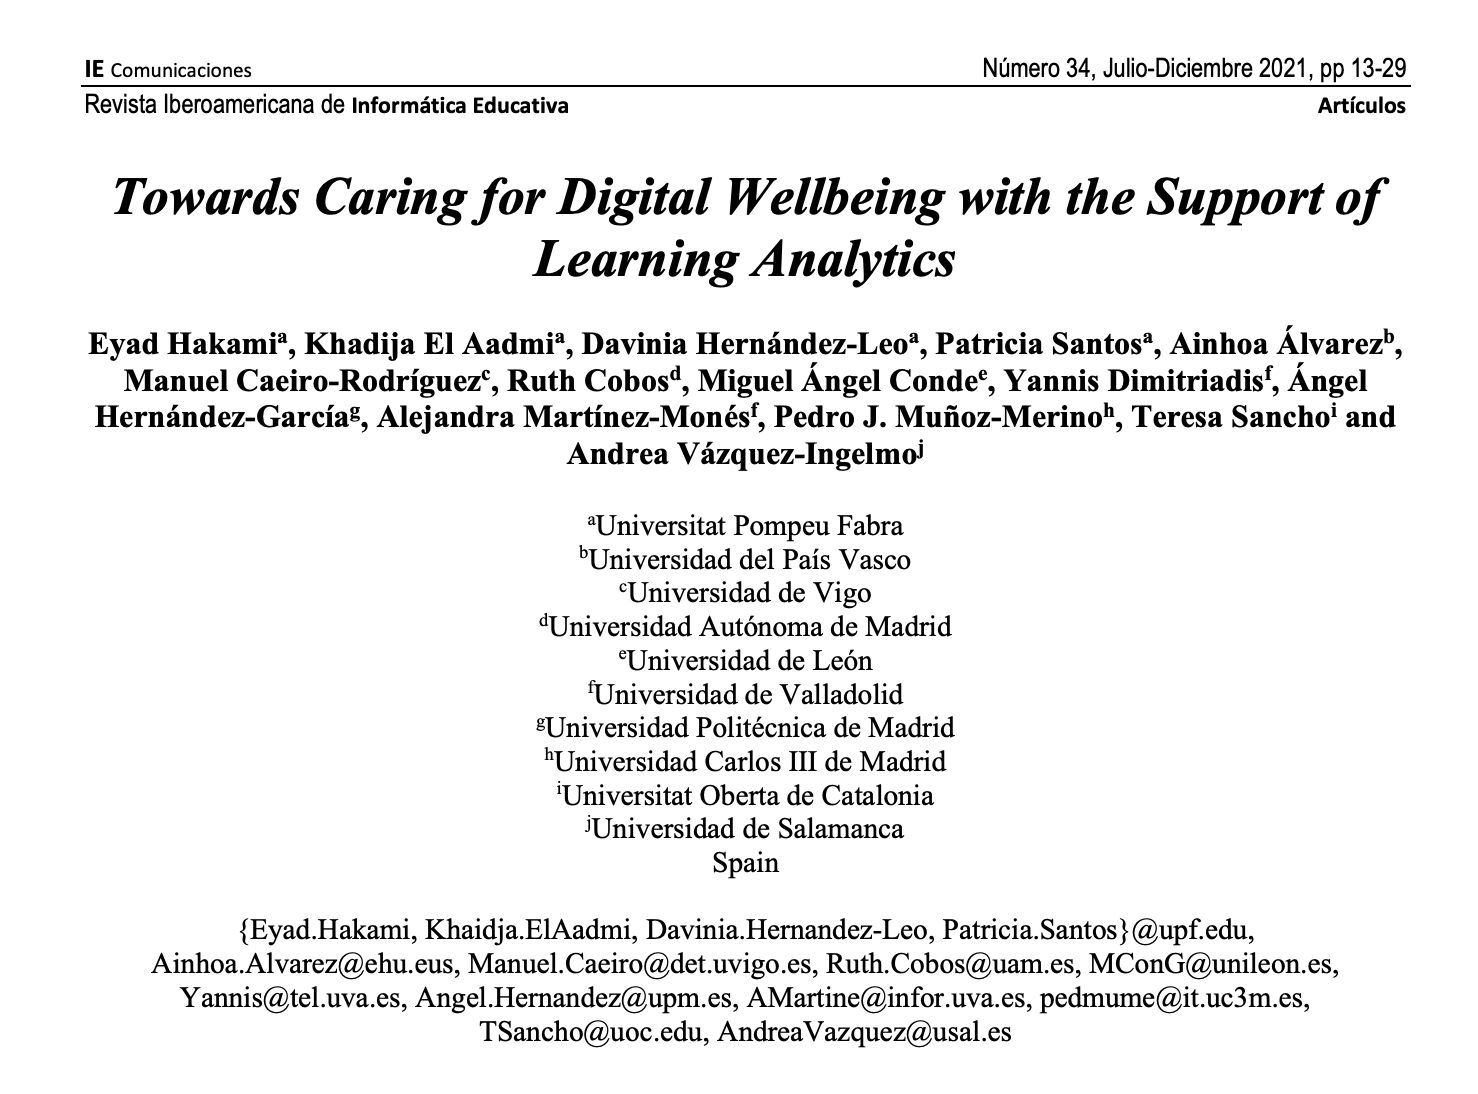 New paper, Towards Caring for Digital Wellbeing with the Support of Learning Analytics